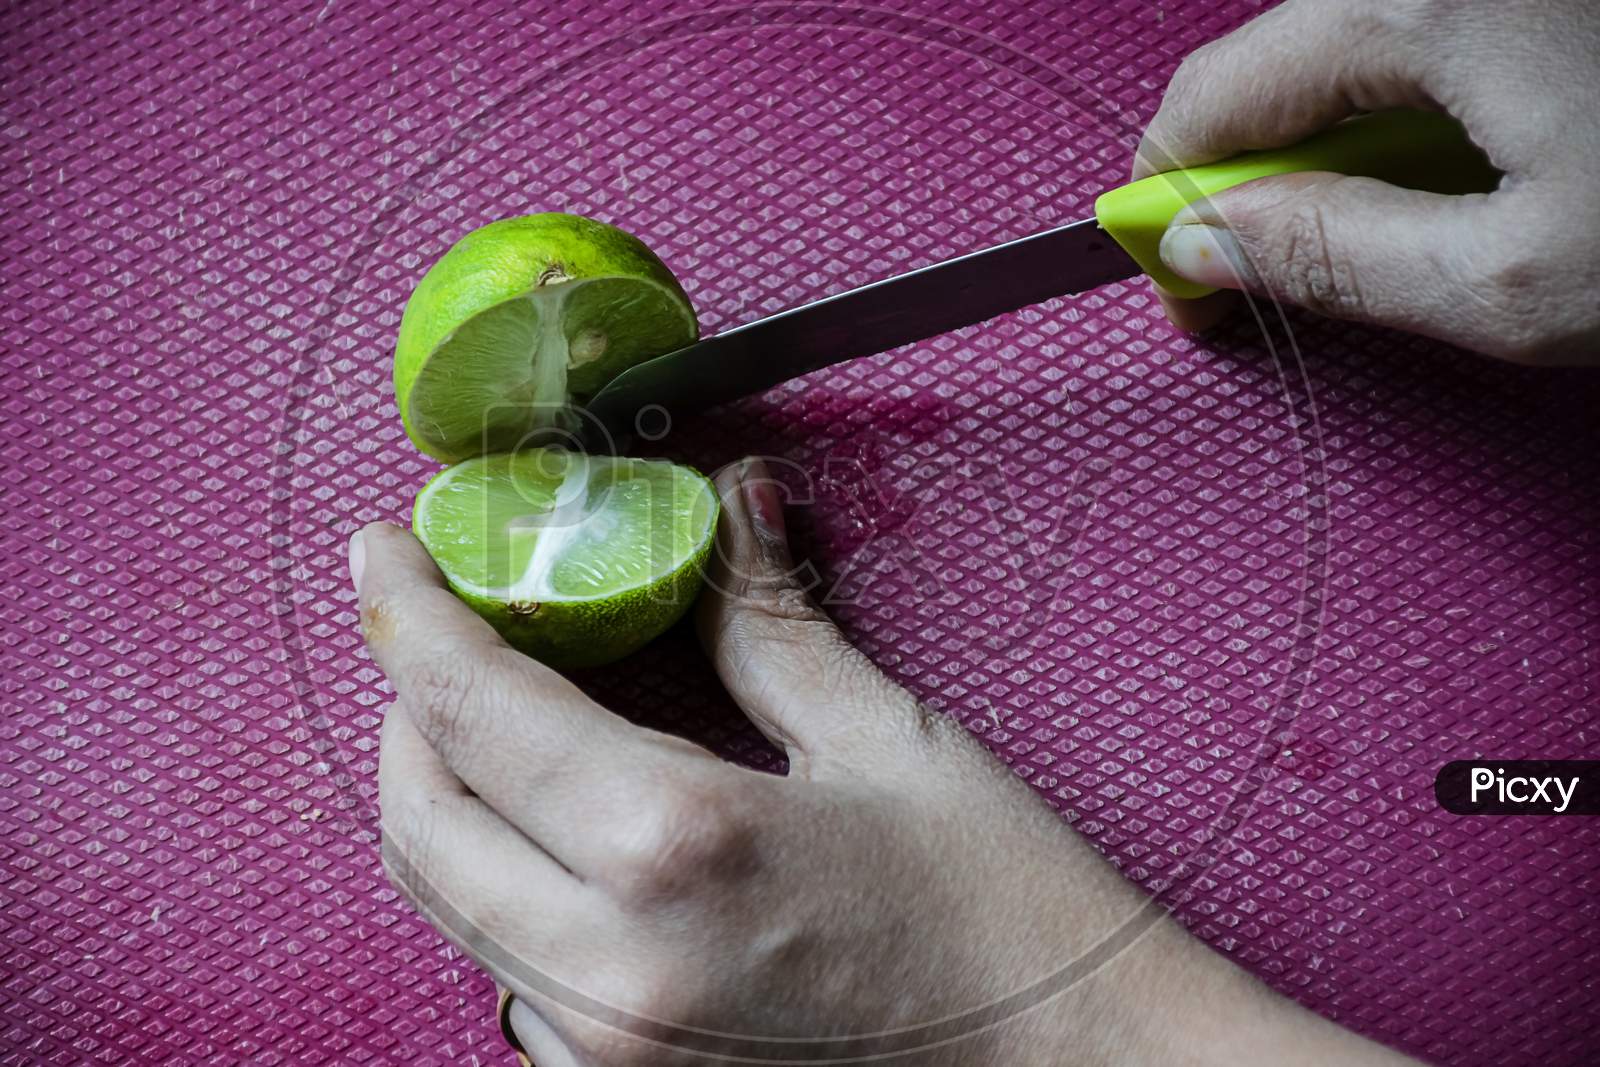 Stock Photo Of Women Cutting Fresh Juicy Lemon On Purple Color Chopping Board With Yellow Color Knife , Focus On Object. Blur Background.